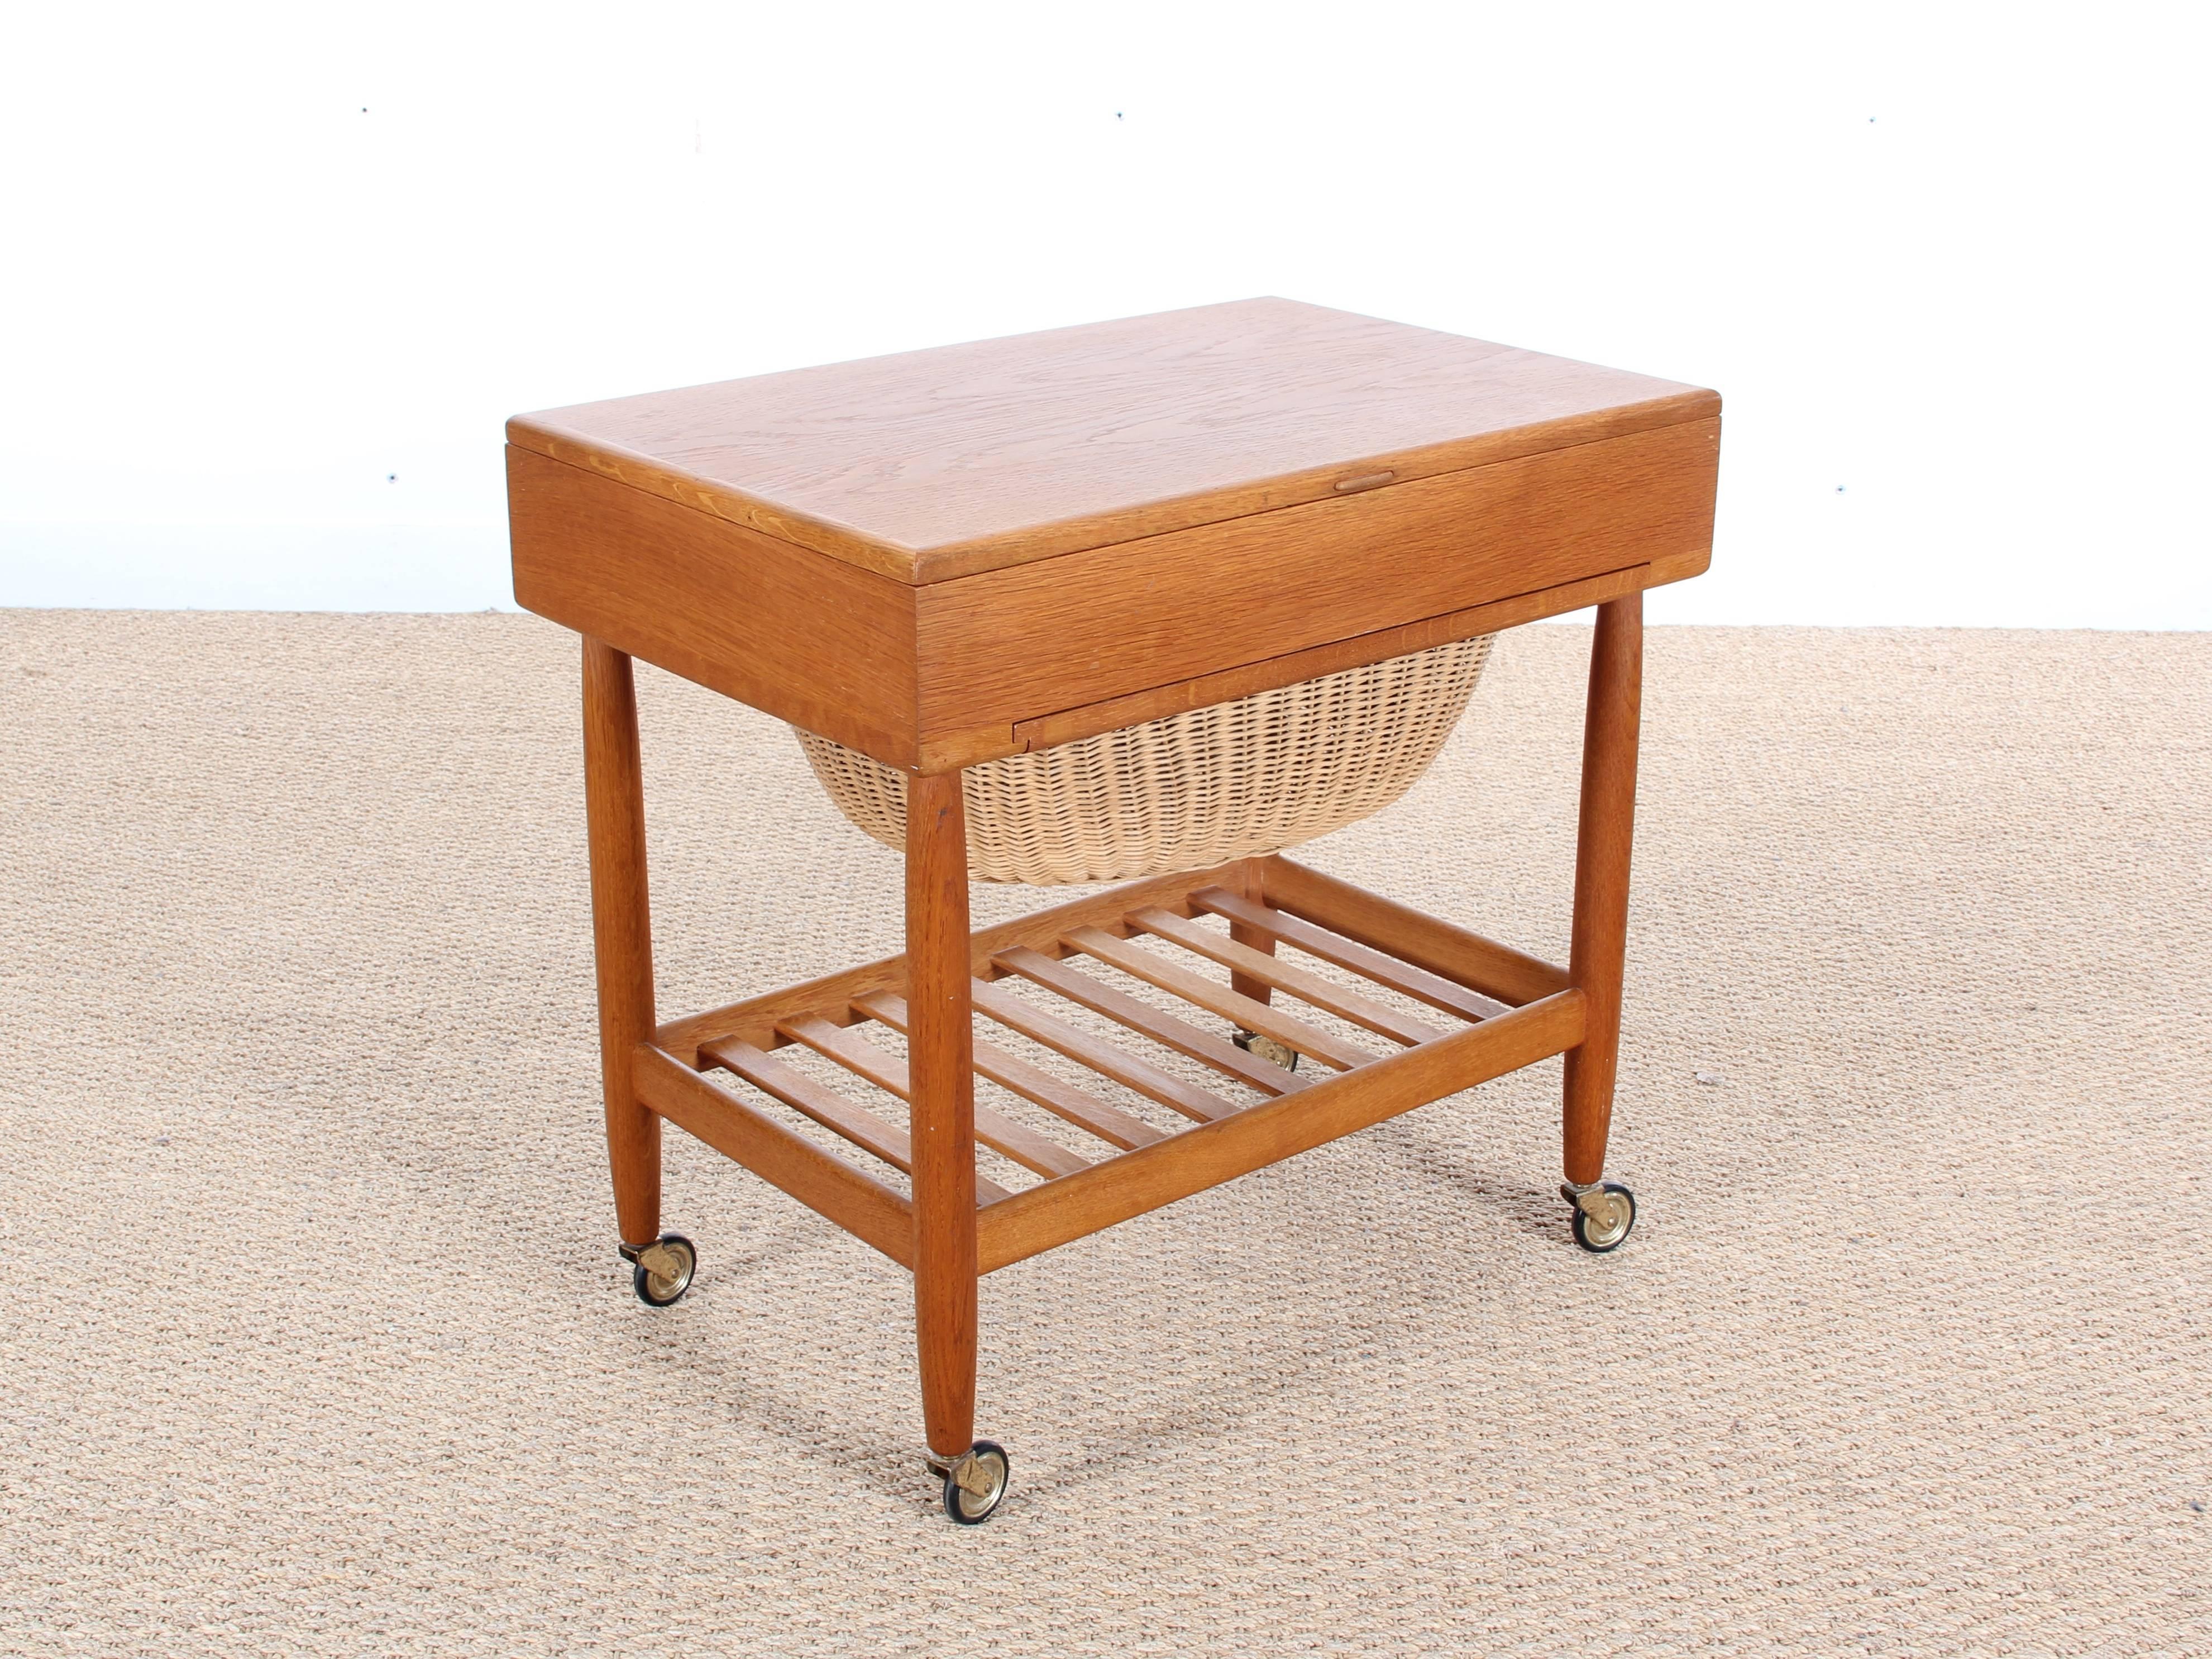 Mid-20th Century Danish Sewing Table in Oak by Ejvind A. Johansson